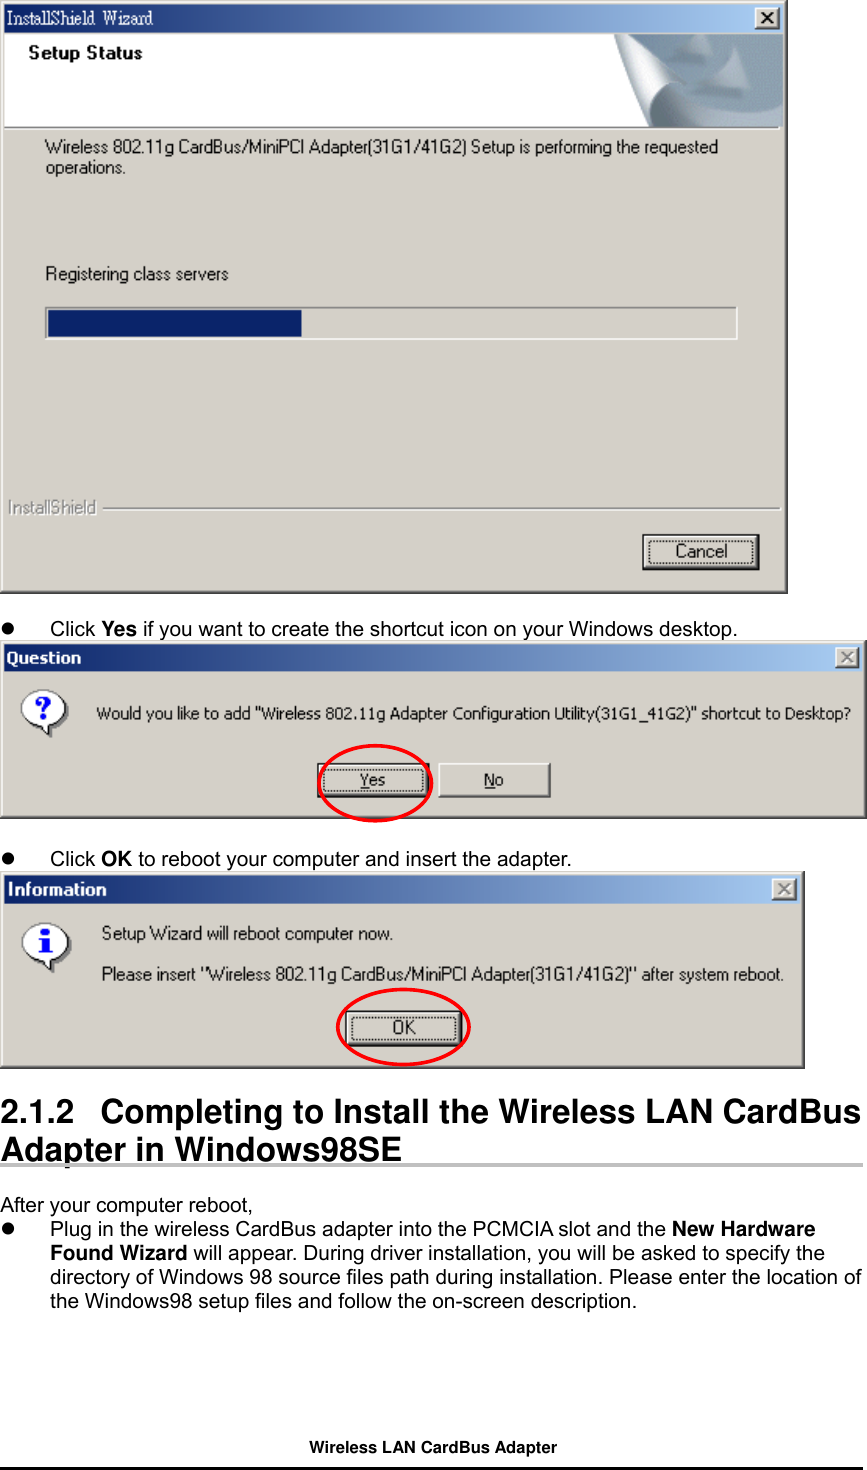     Click Yes if you want to create the shortcut icon on your Windows desktop.     Click OK to reboot your computer and insert the adapter.   2.1.2   Completing to Install the Wireless LAN CardBus Adapter in Windows98SE  After your computer reboot,     Plug in the wireless CardBus adapter into the PCMCIA slot and the New Hardware Found Wizard will appear. During driver installation, you will be asked to specify the directory of Windows 98 source files path during installation. Please enter the location of the Windows98 setup files and follow the on-screen description.   Wireless LAN CardBus Adapter 